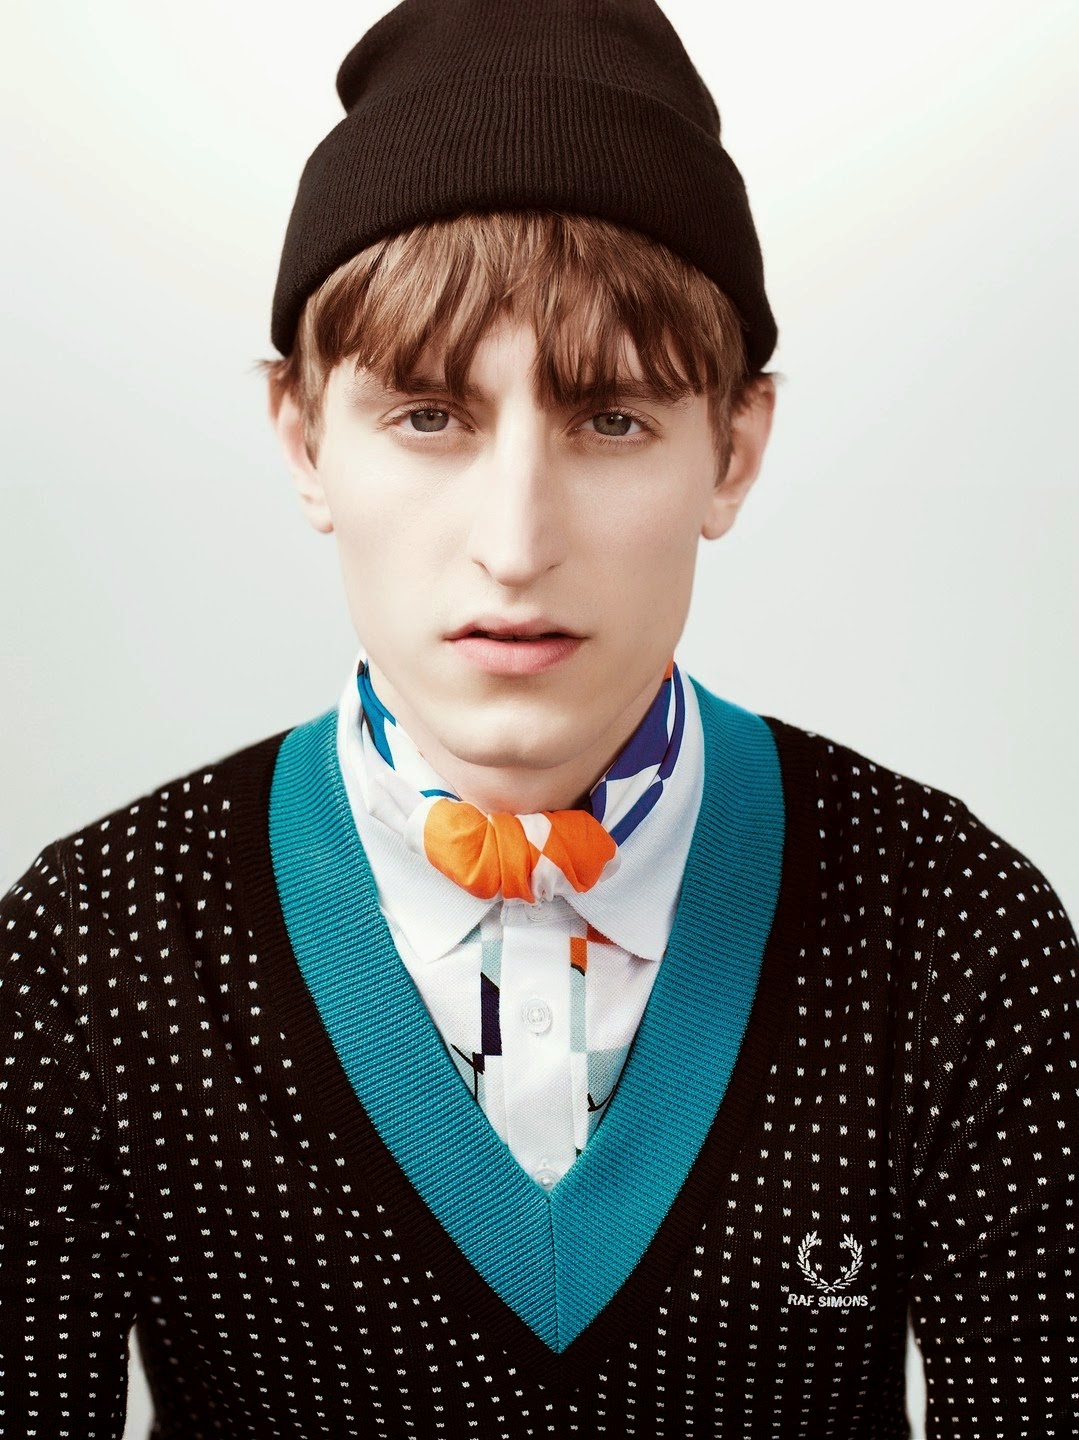 The Essentialist - Fashion Advertising Updated Daily: Fred Perry feat ...